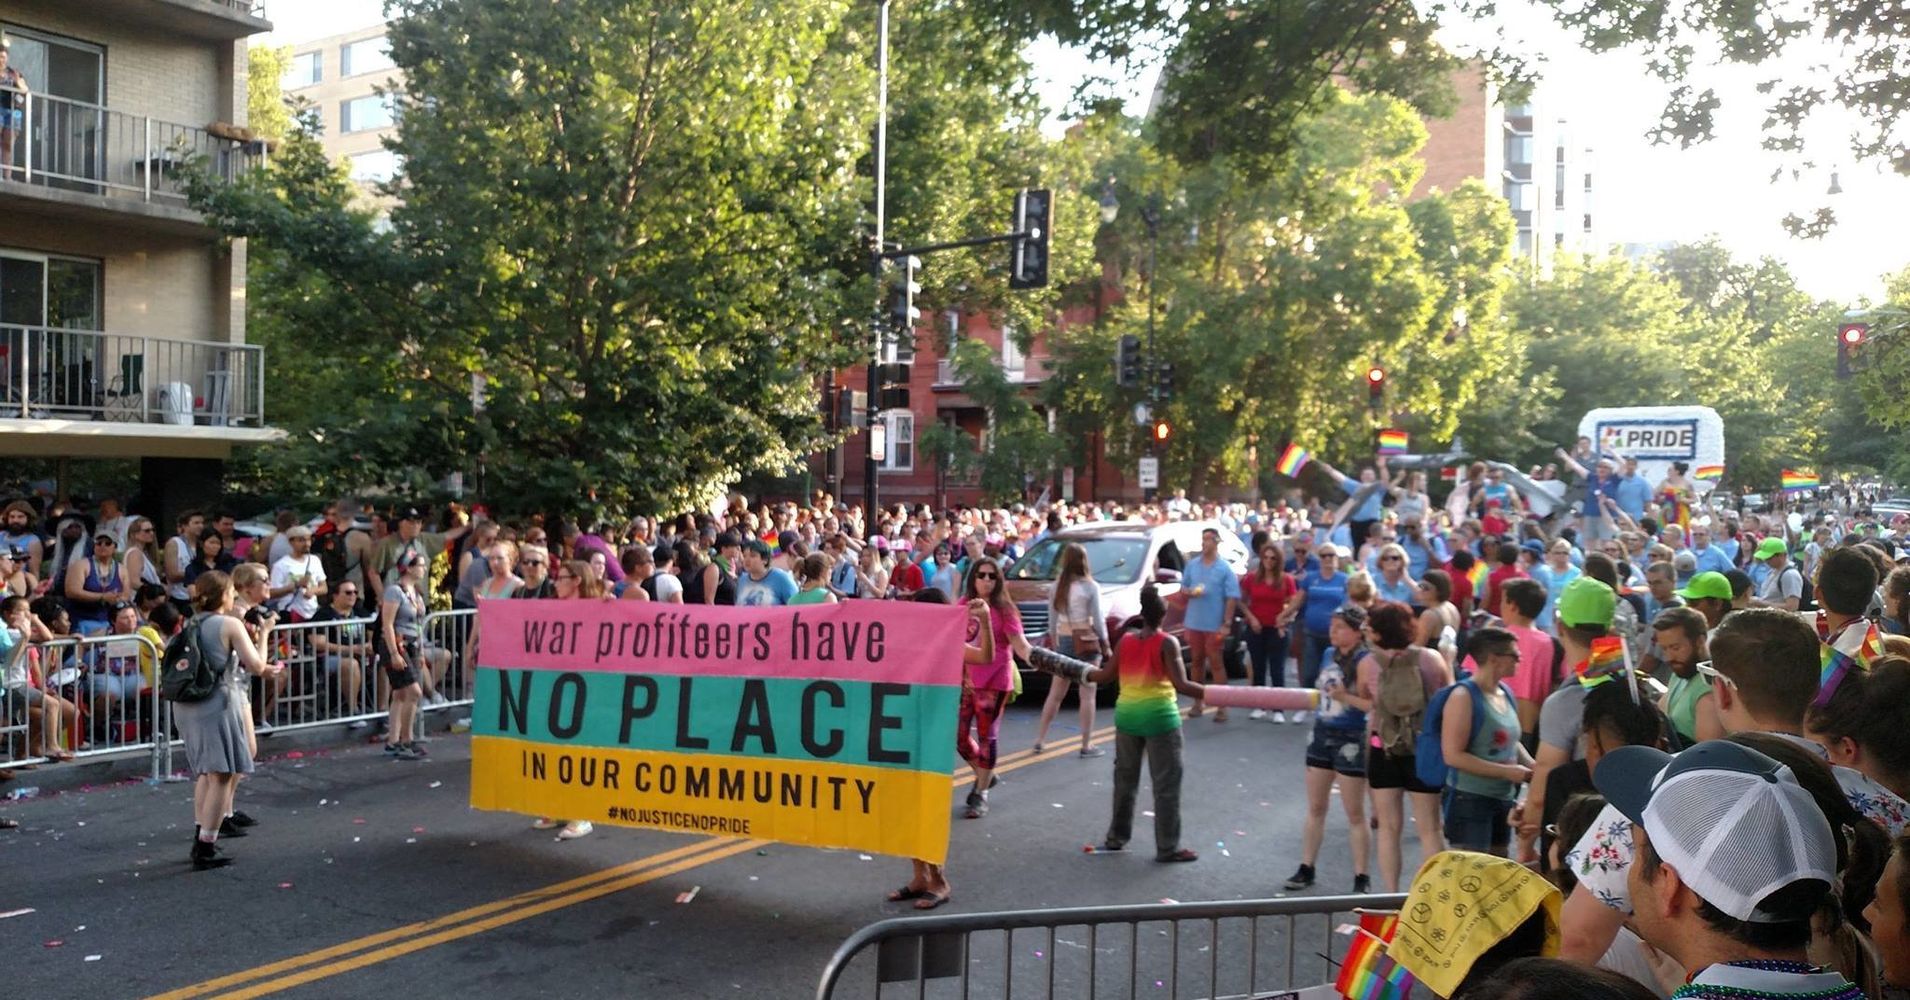 Protesters Disrupt D.C. Pride Parade, Seek A 'Different Vision' For The